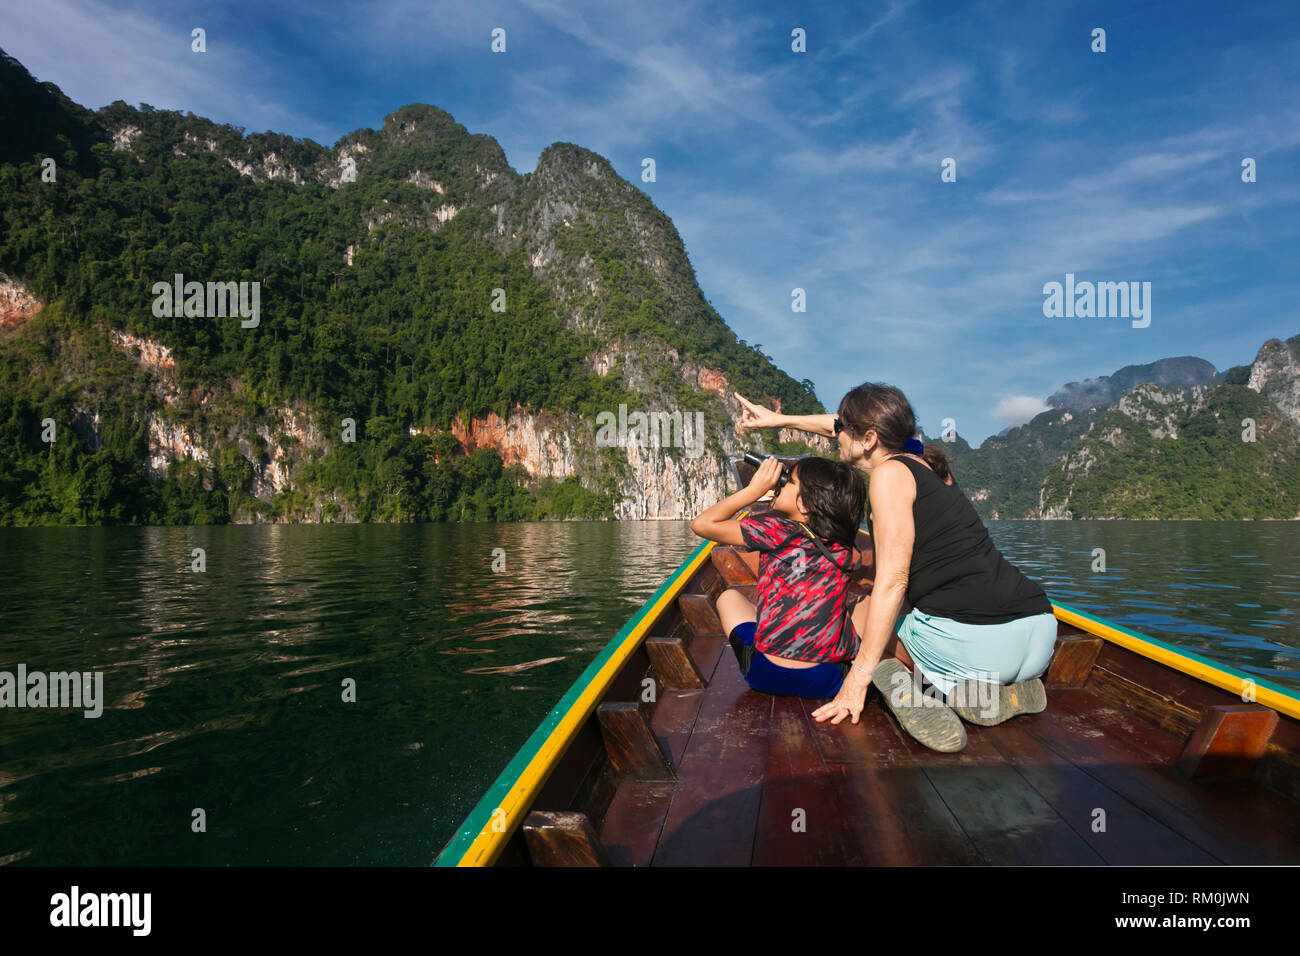 Visitors bird watch on CHEOW LAN LAKE in KHAO SOK NATIONAL PARK - THAILAND Stock Photo